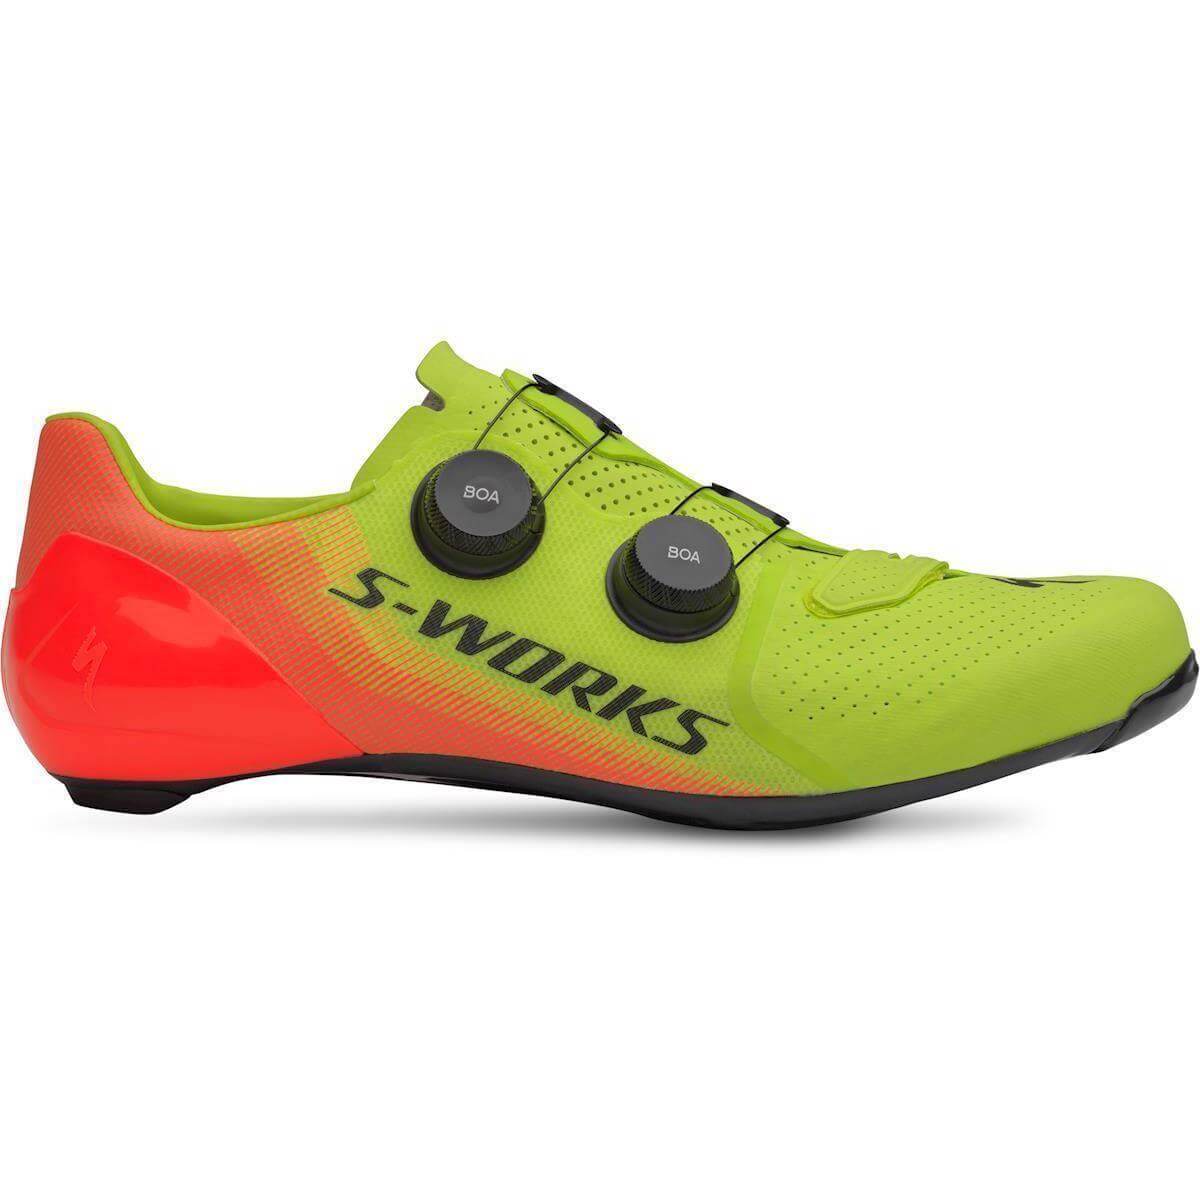 S-Works 7 Road Shoe